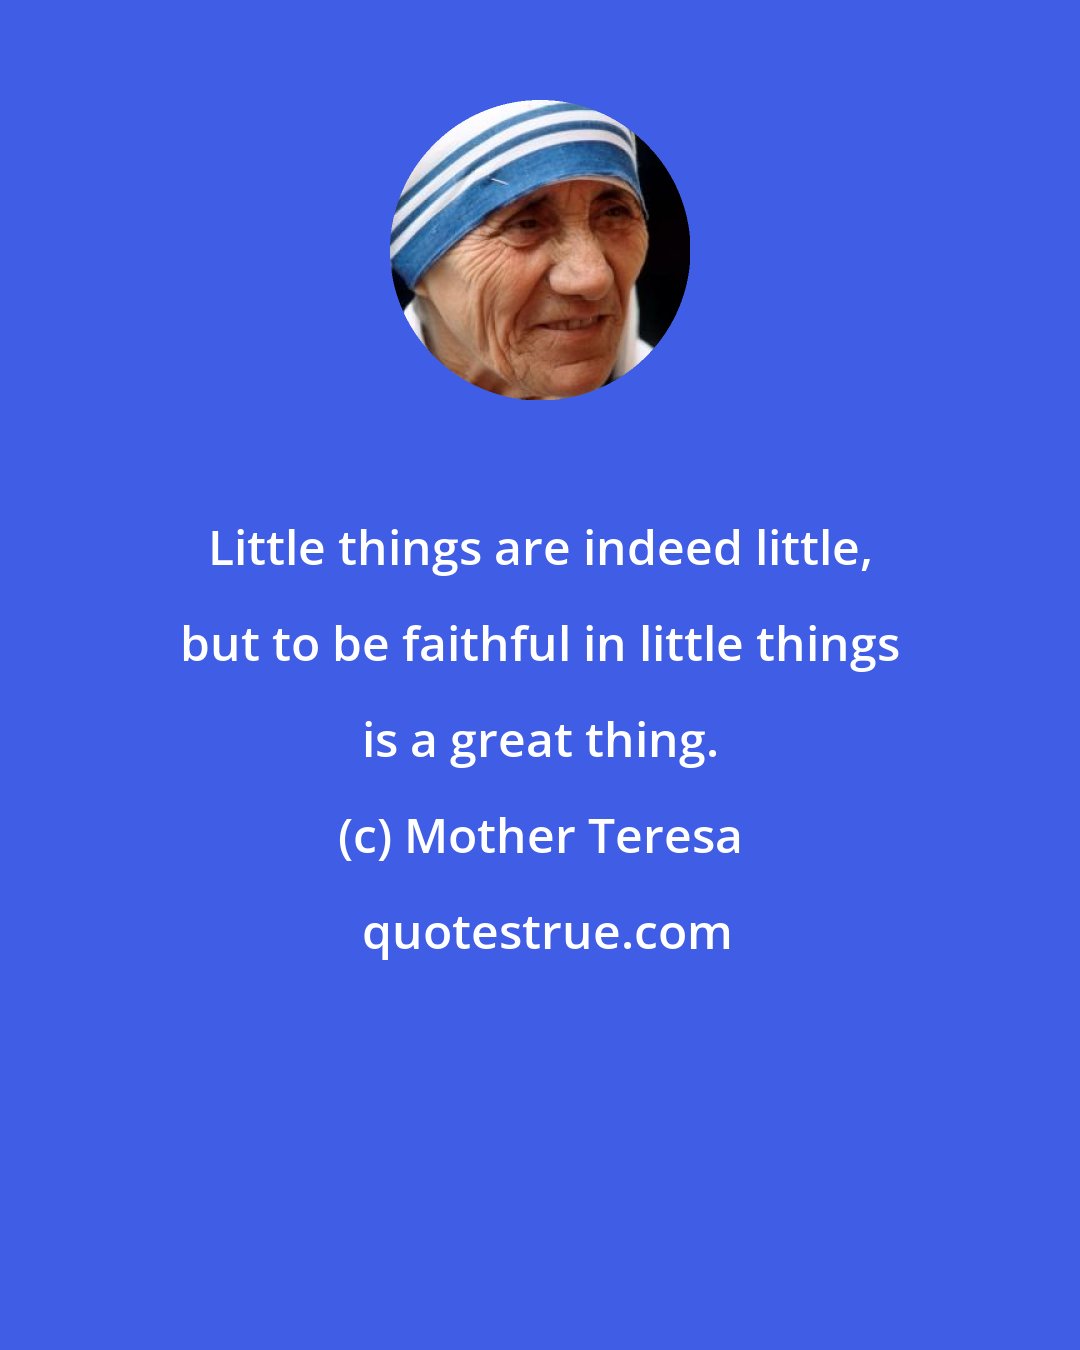 Mother Teresa: Little things are indeed little, but to be faithful in little things is a great thing.